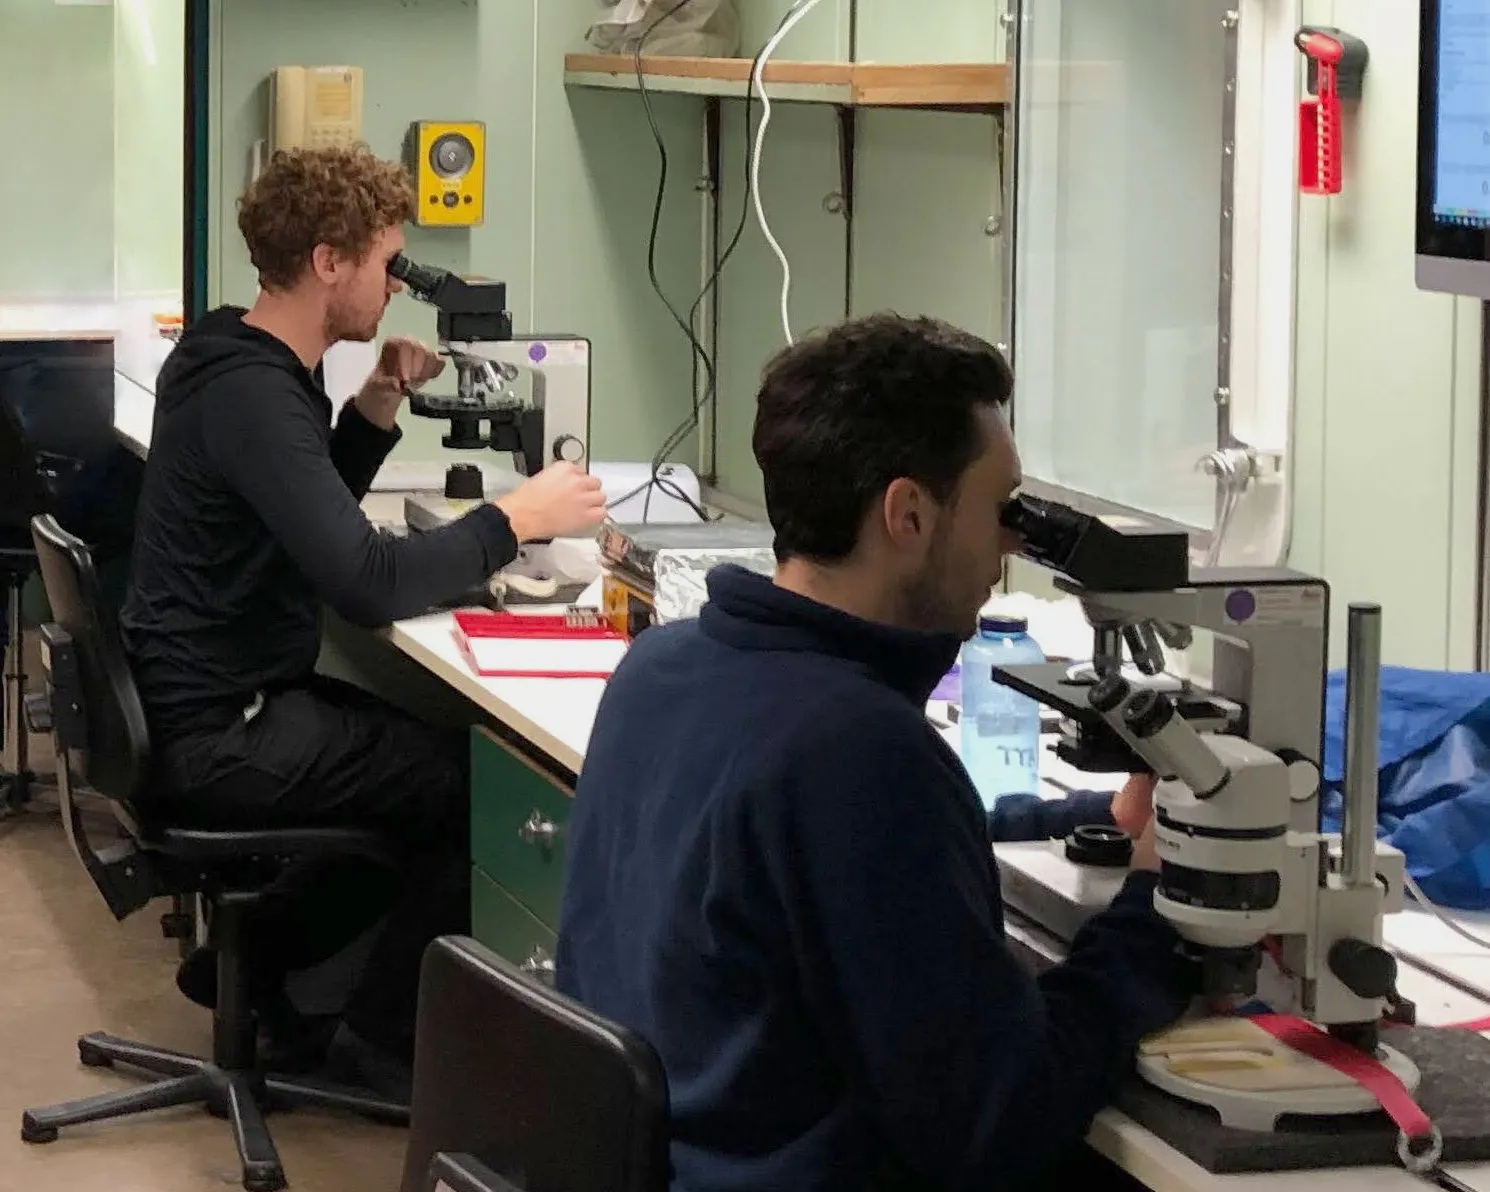 Two scientists in a green laboratory looking through microscopes which are tied down to the table.